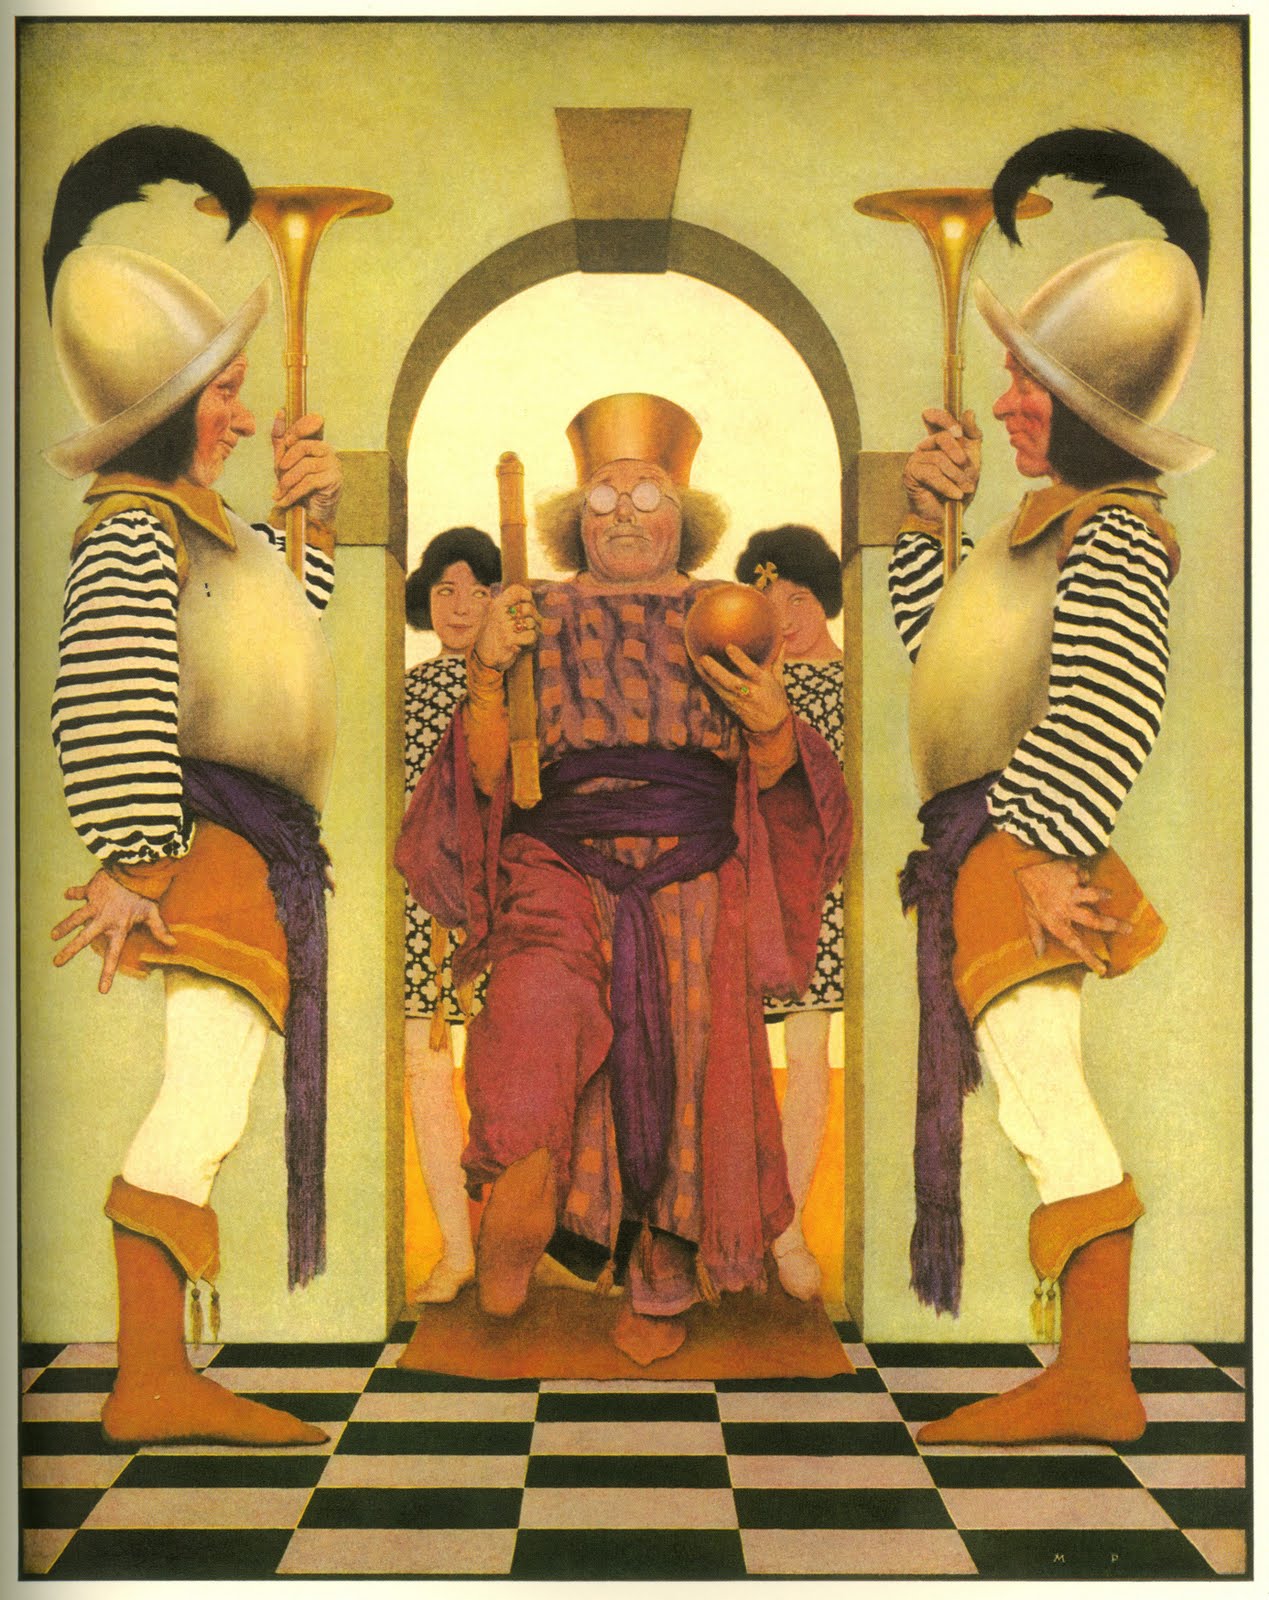 Le Knave of Hearts - Maxfield Parrish